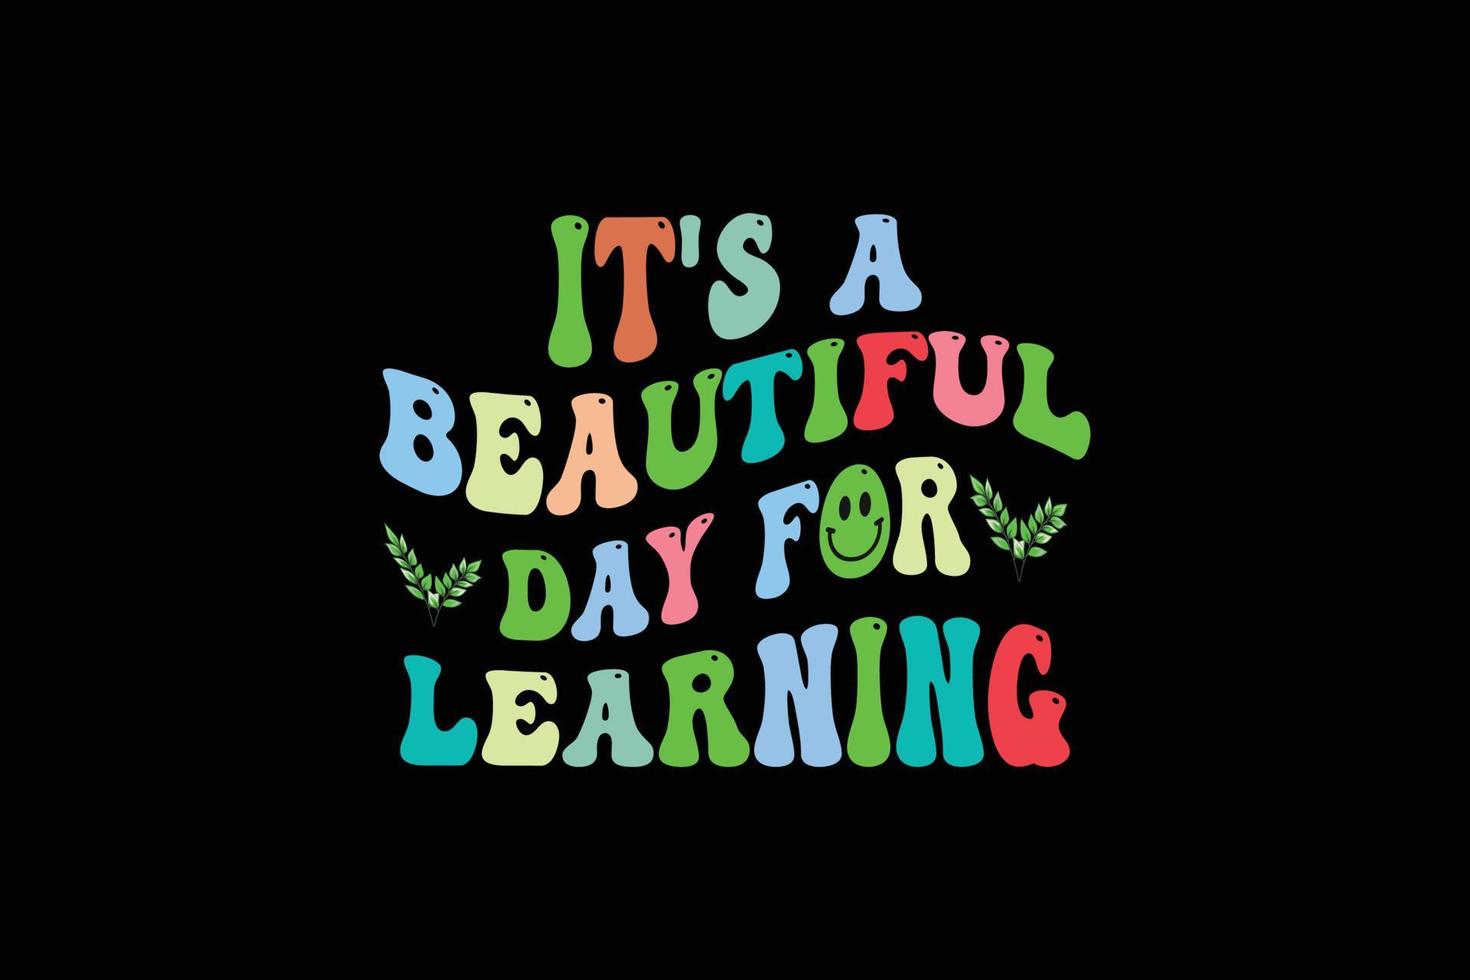 It's beautiful day for learning retro t shirt design vector